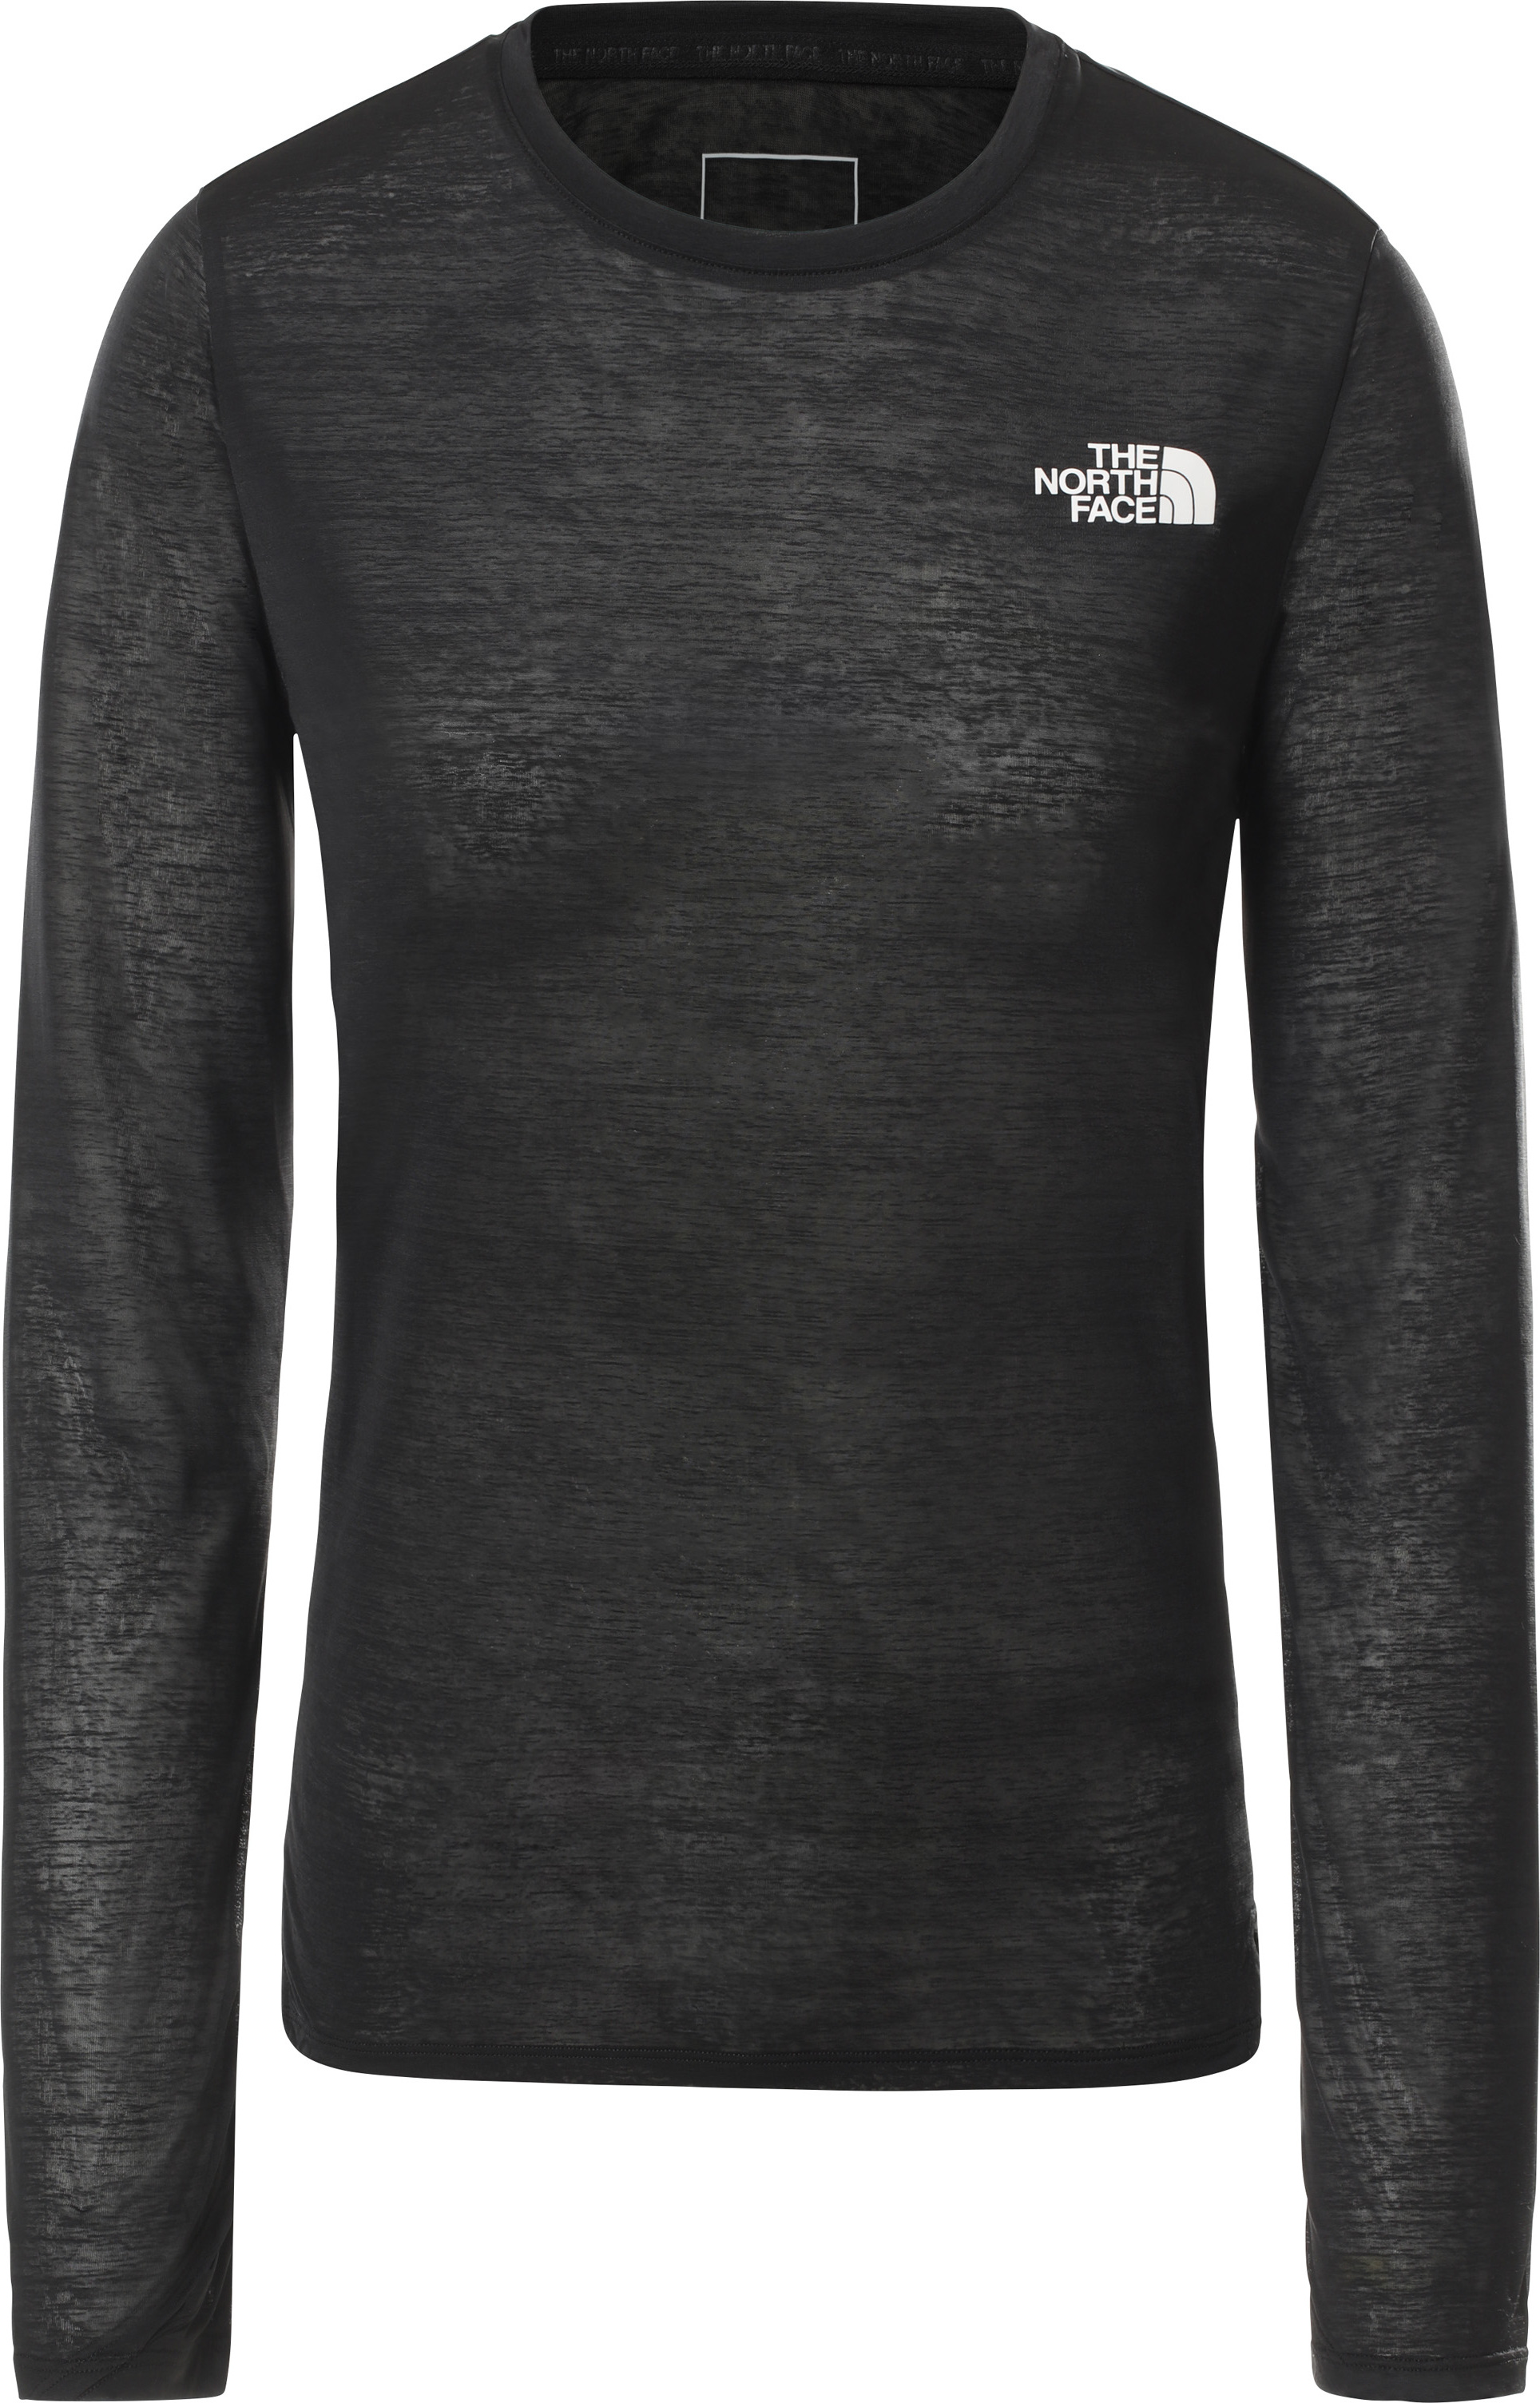 The North Face Women's Up With The Sun Long-Sleeve Shirt Tnf Black S, TNF Black